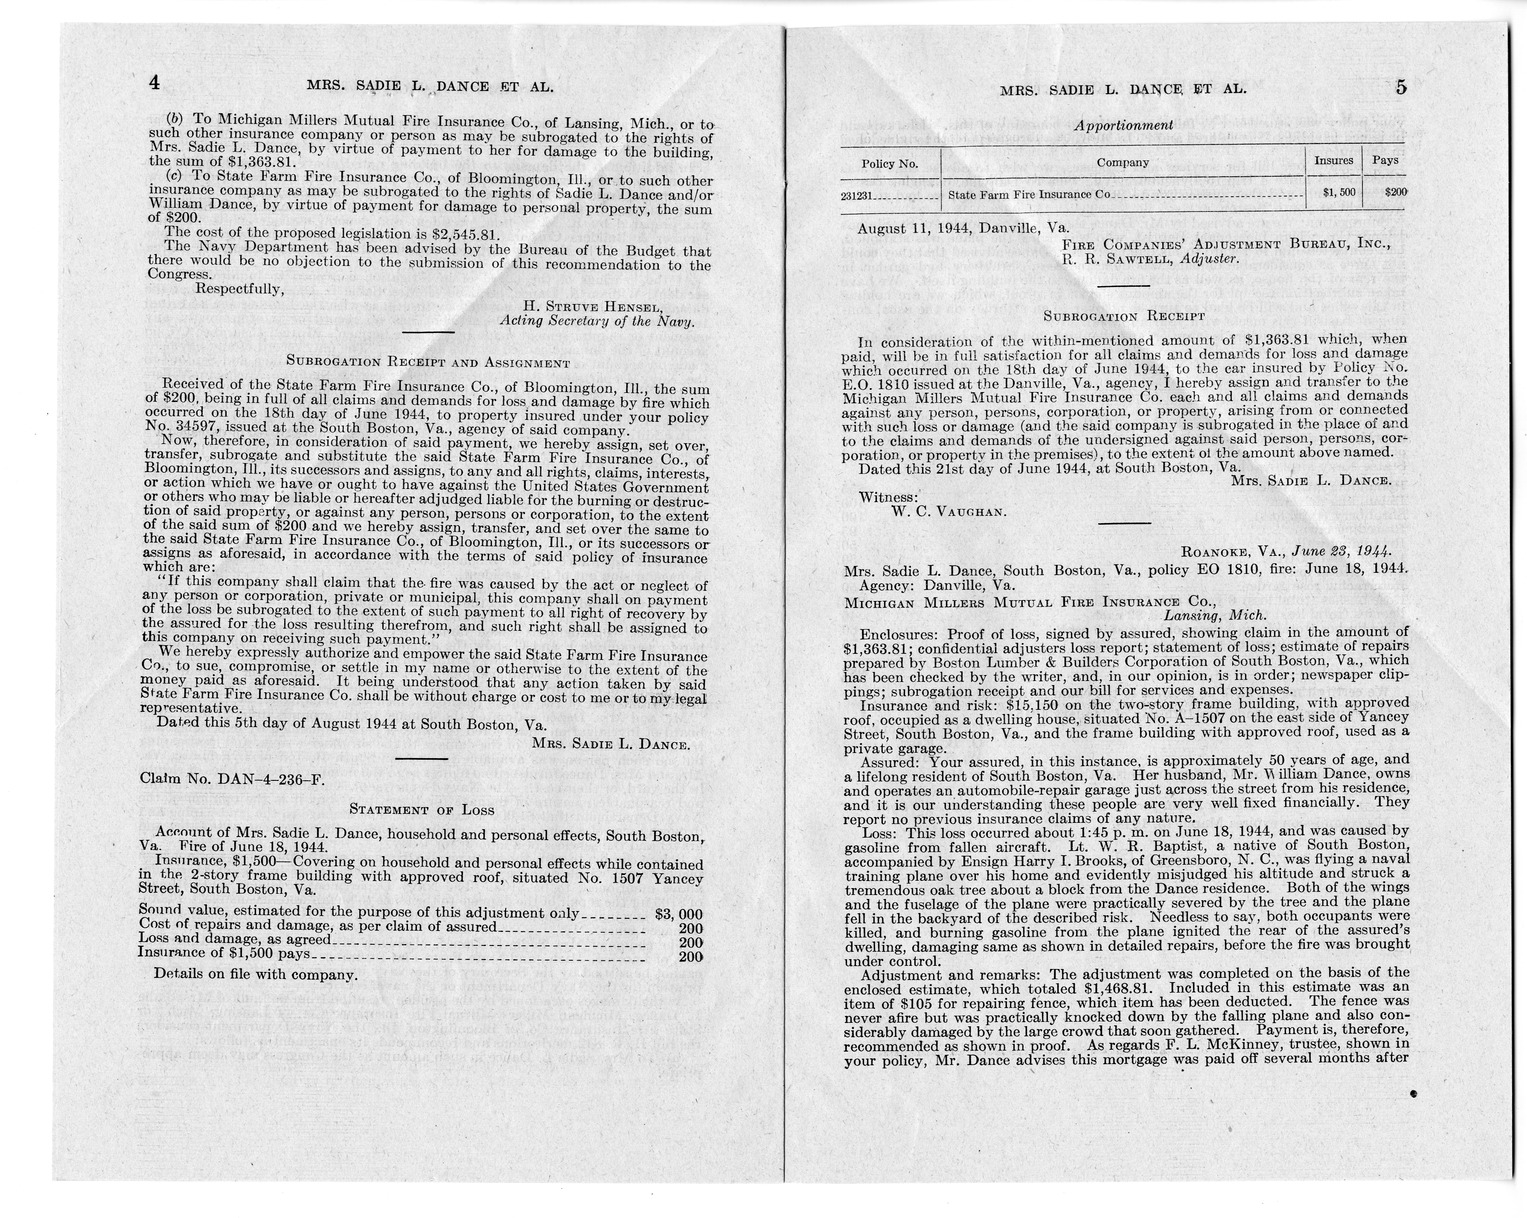 Memorandum from Frederick Bailey to M. C. Latta, H.R. 842, For the Relief of Mrs. Sadie L. Dance, with Attachments